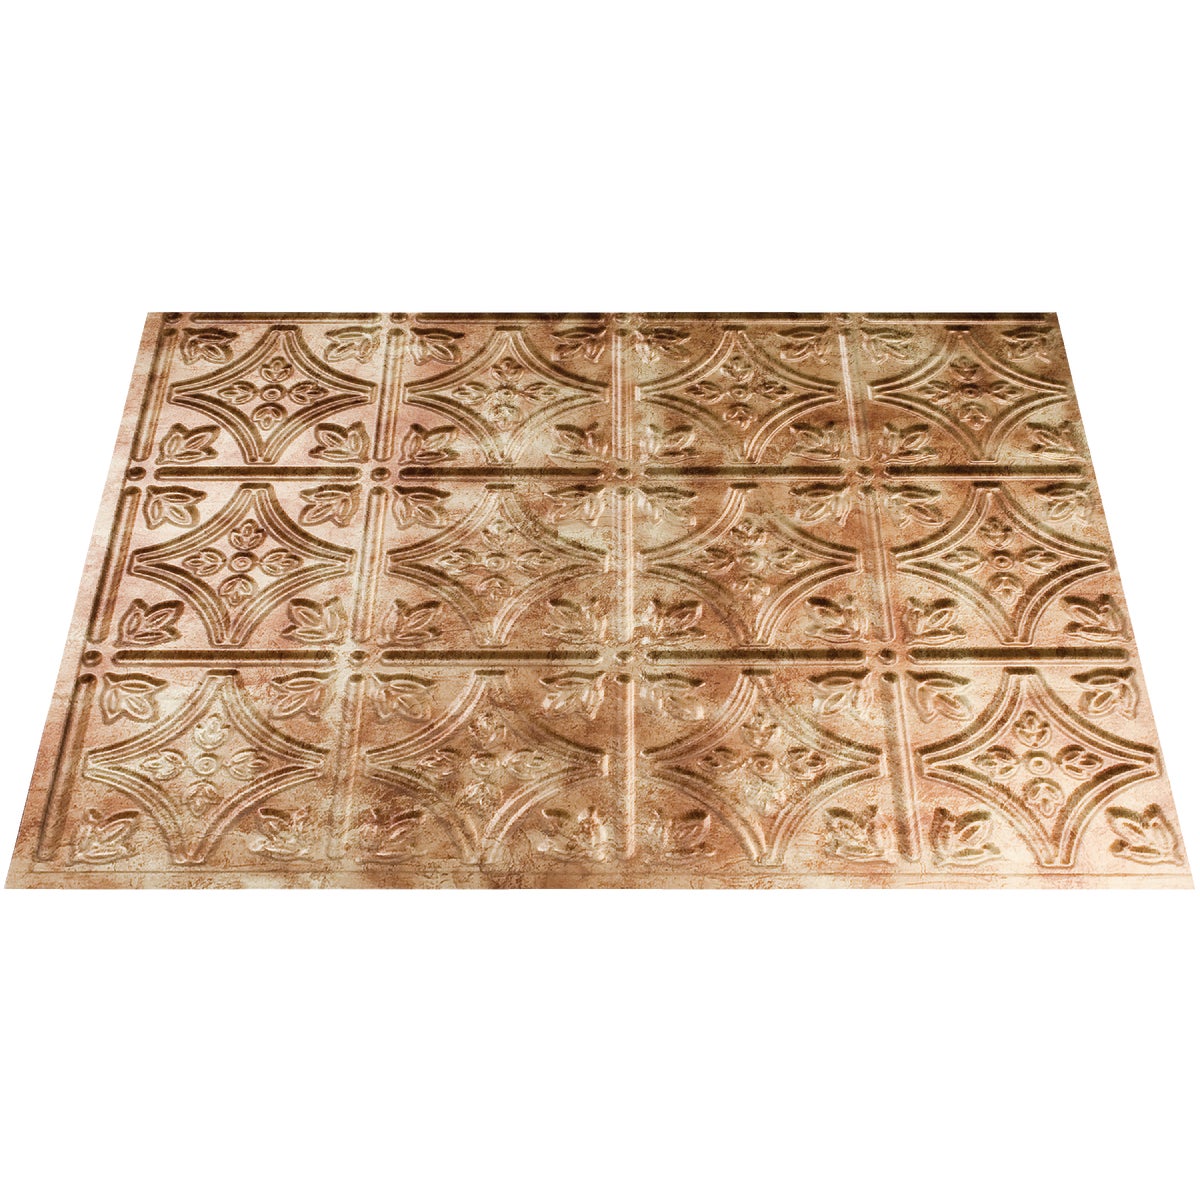 Fasade D60-17 Fasade 18 In. x 24 In. Thermoplastic Backsplash Panel, Bermuda Bronze Traditional 1 Panel D60-17 Pack of 5